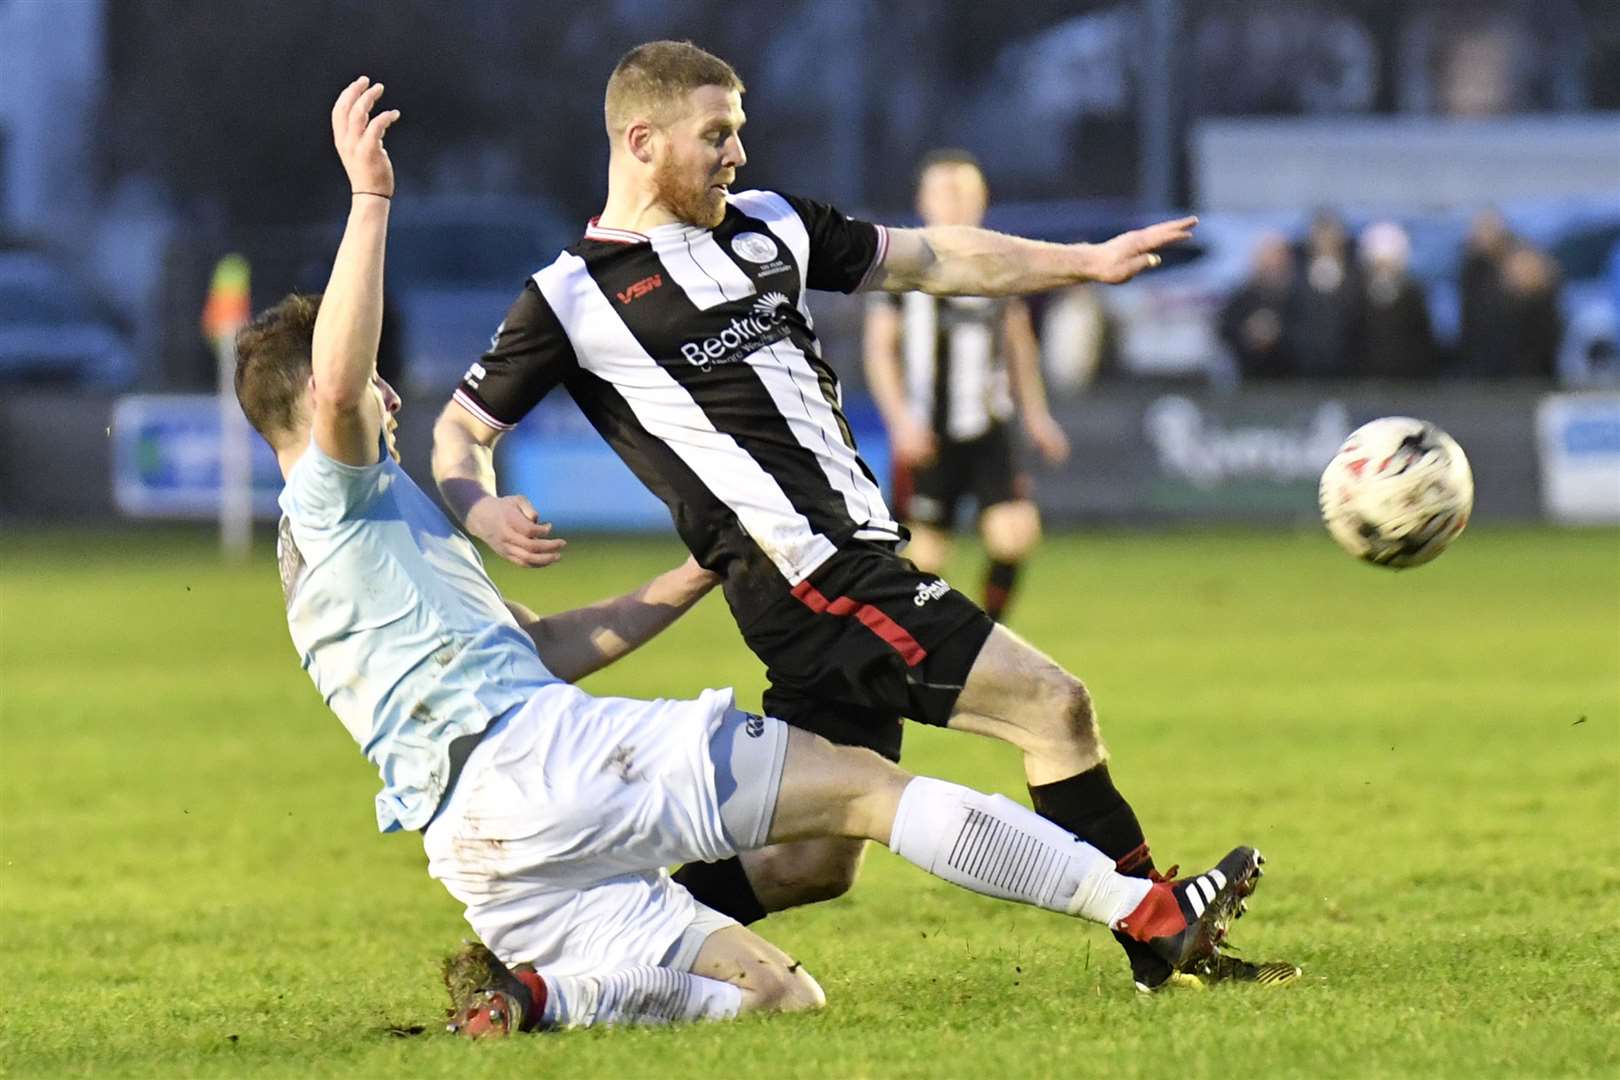 Fraserburgh's Bryan Hay and Wick Academy's Davie Allan in action at Harmsworth Park last season. Picture: Bob Roger